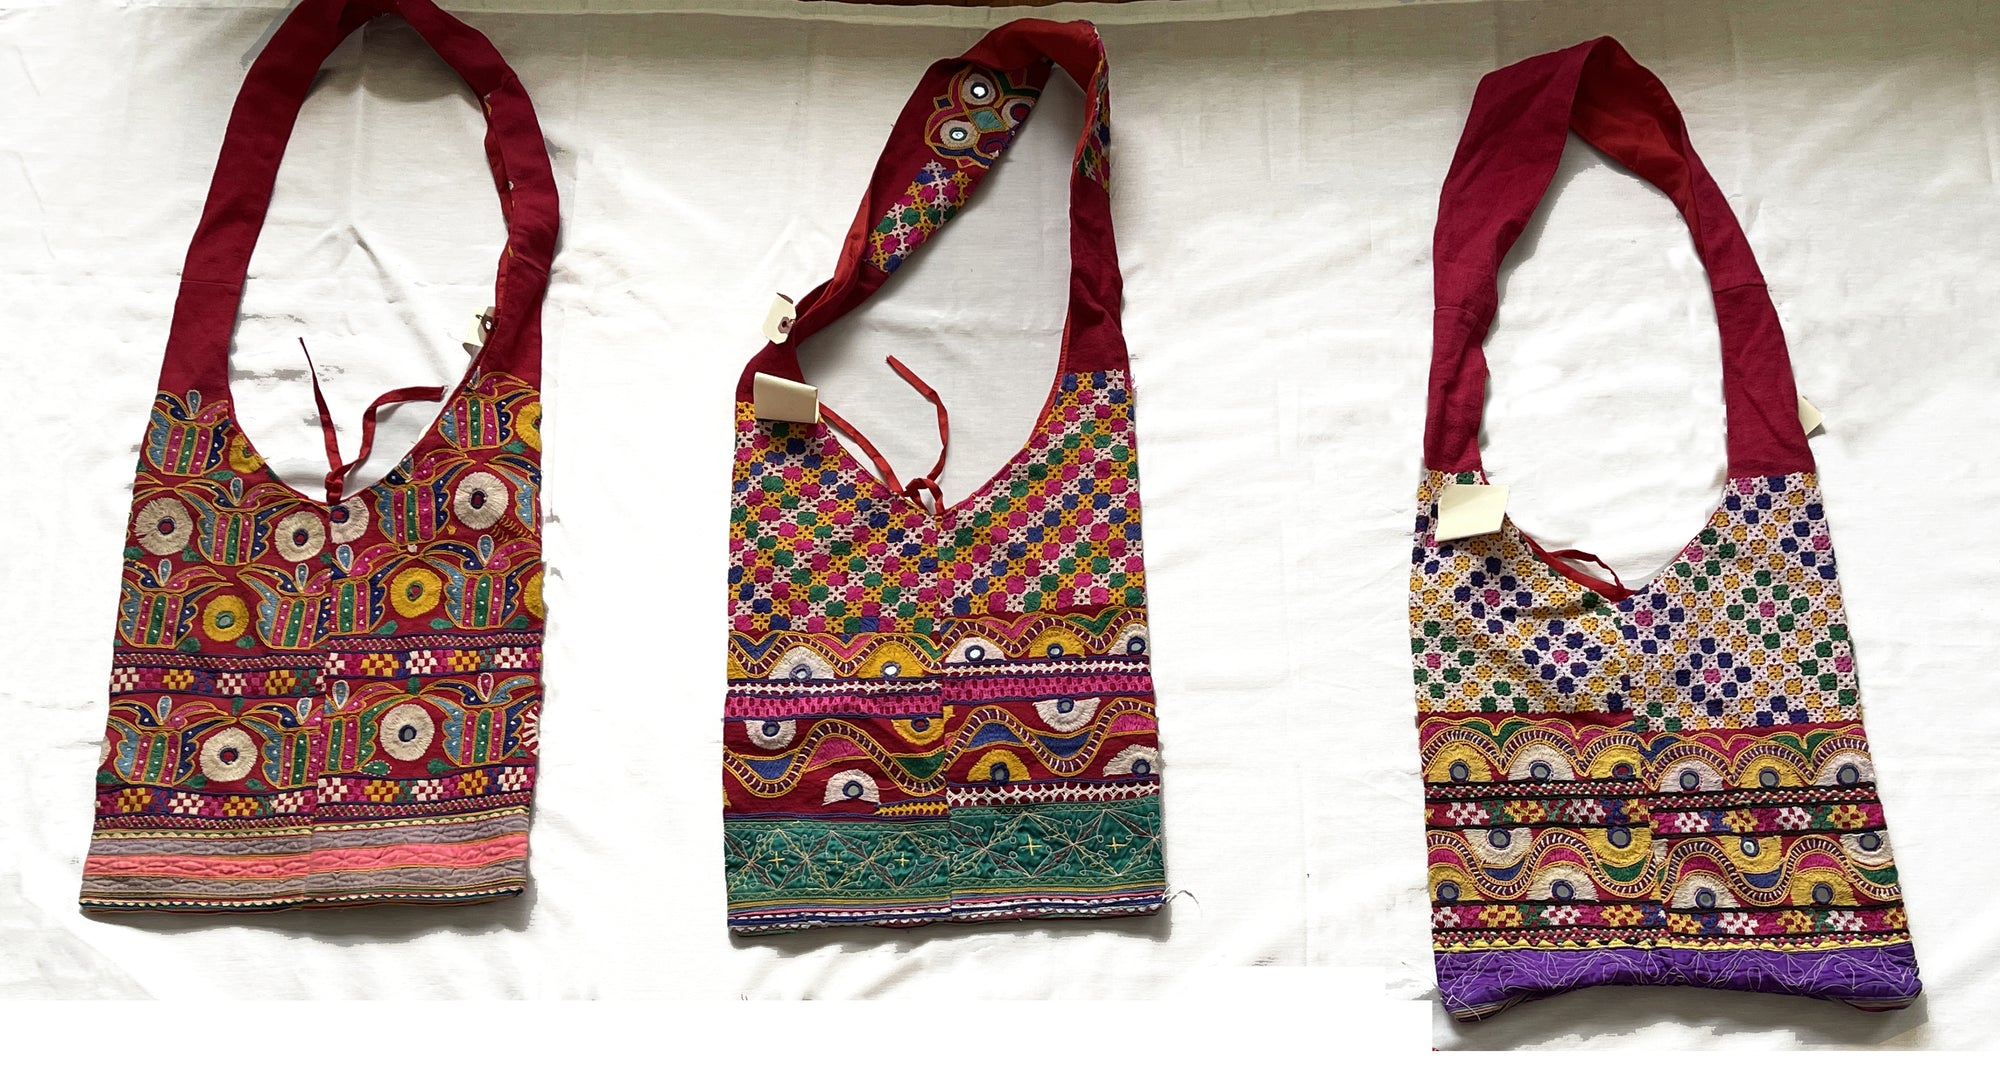 5512  SOLD Group of 3 Sling Bags made of Vintage Textile fragments